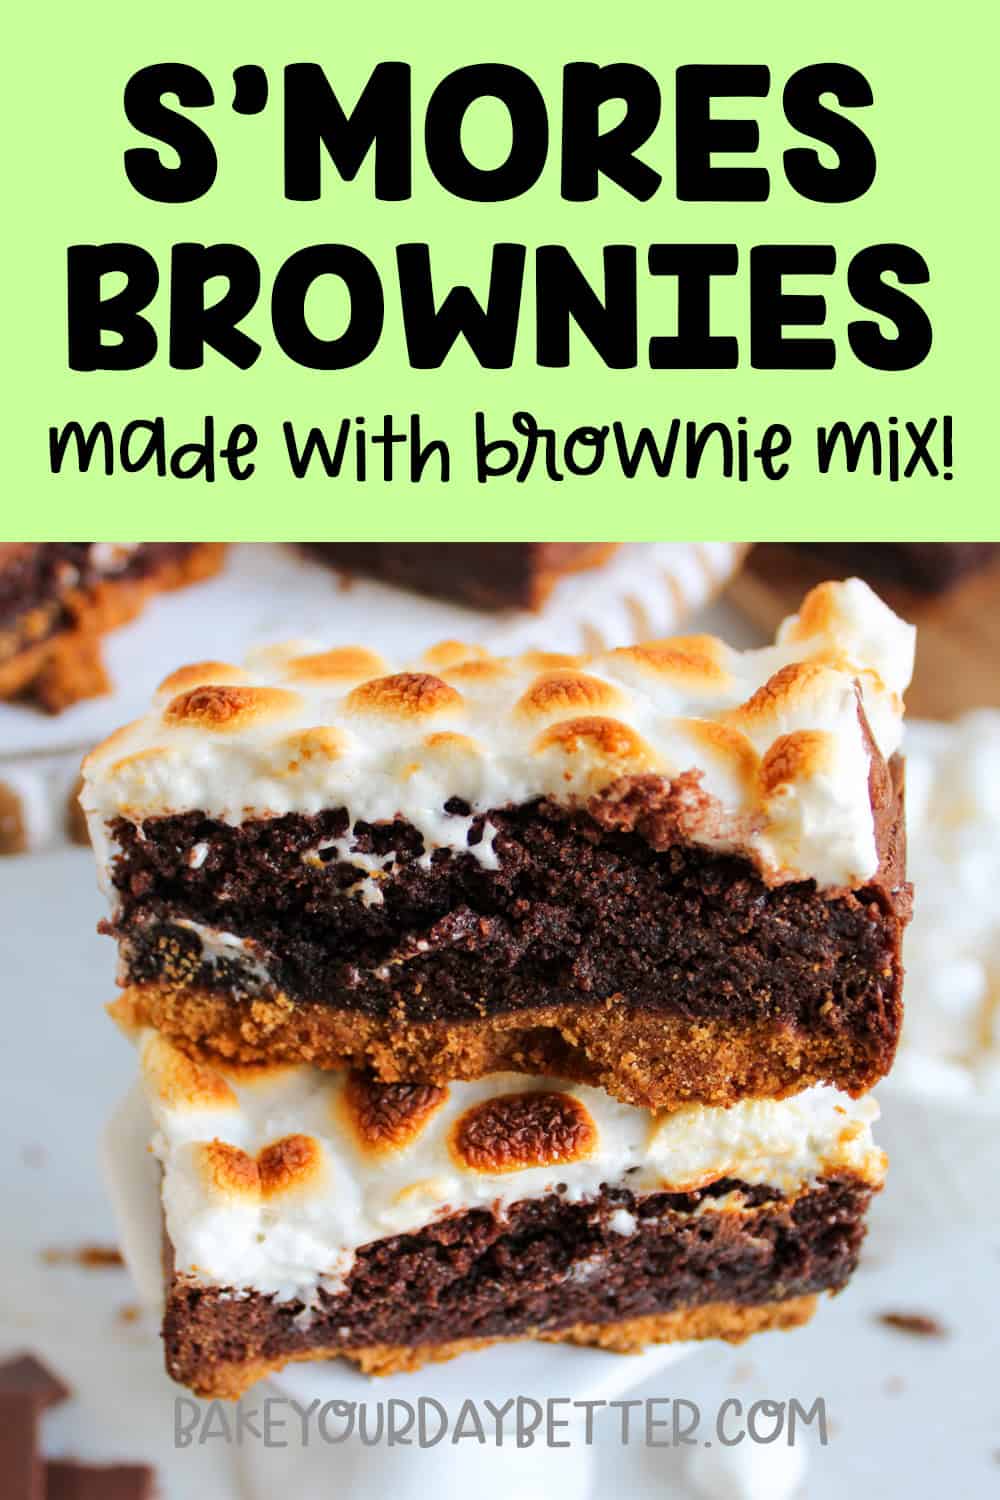 picture of s'mores brownies with text overlay that says: s'mores brownies made with brownie mix!